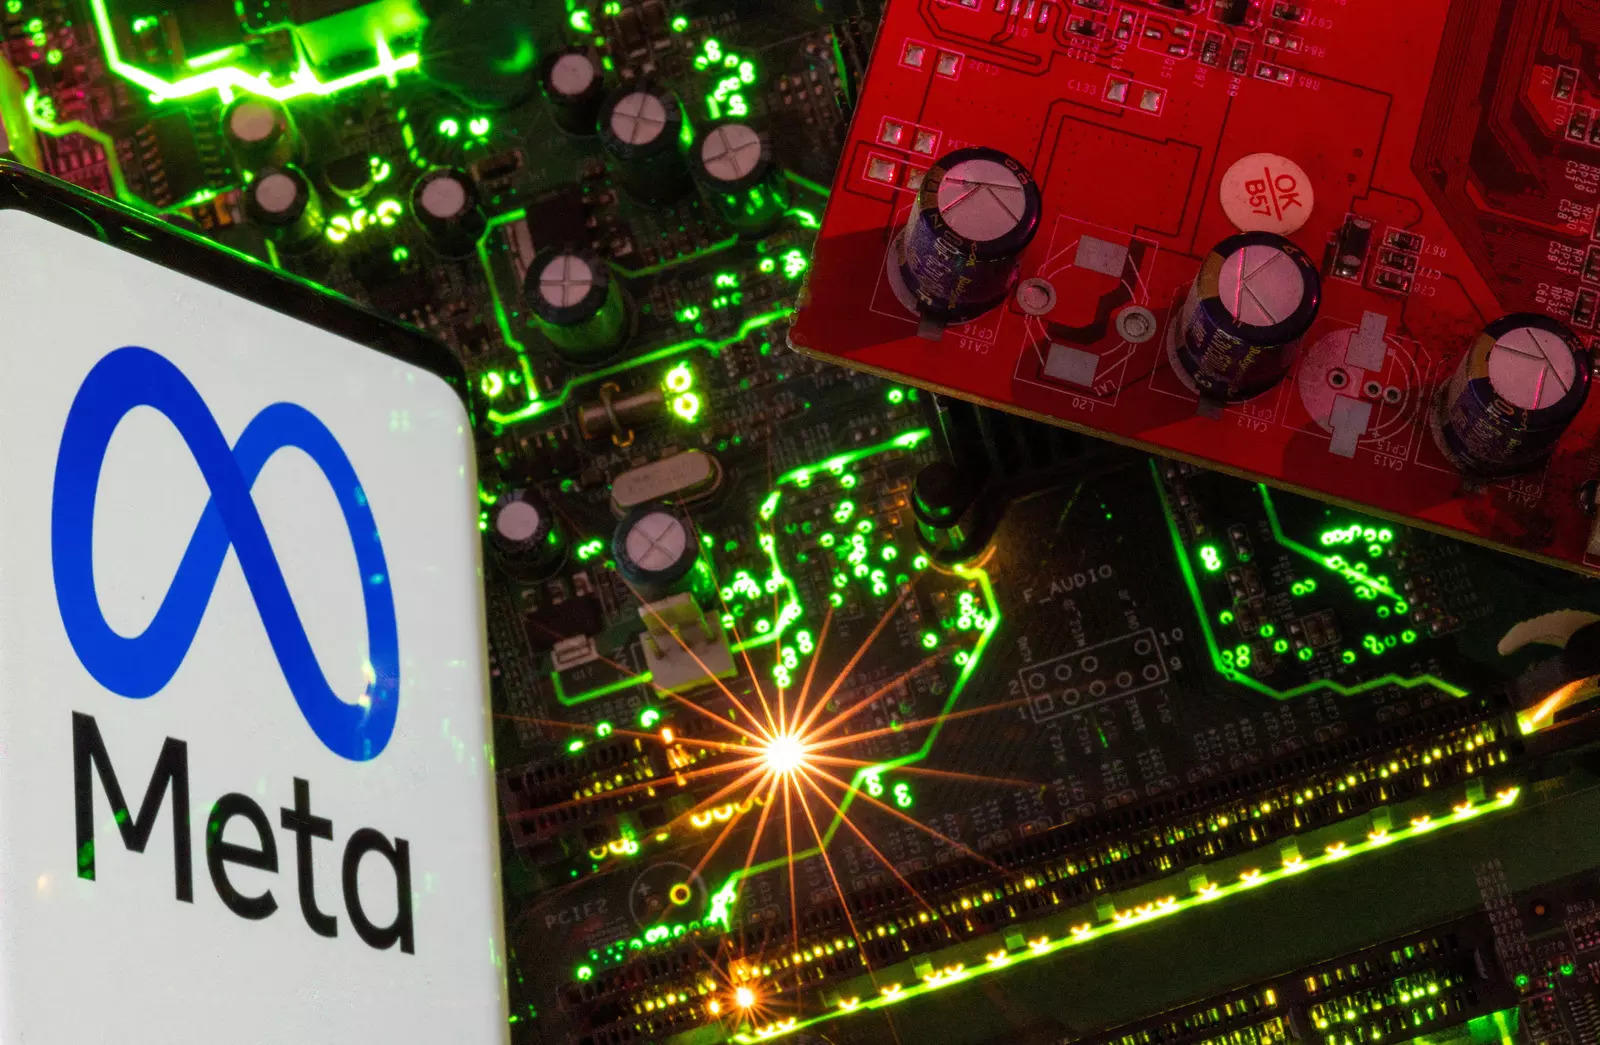  FILE PHOTO: A smartphone with a displayed Meta logo is placed on a computer motherboard in this illustration taken February 23, 2023. REUTERS/Dado Ruvic/Illustration/File Photo